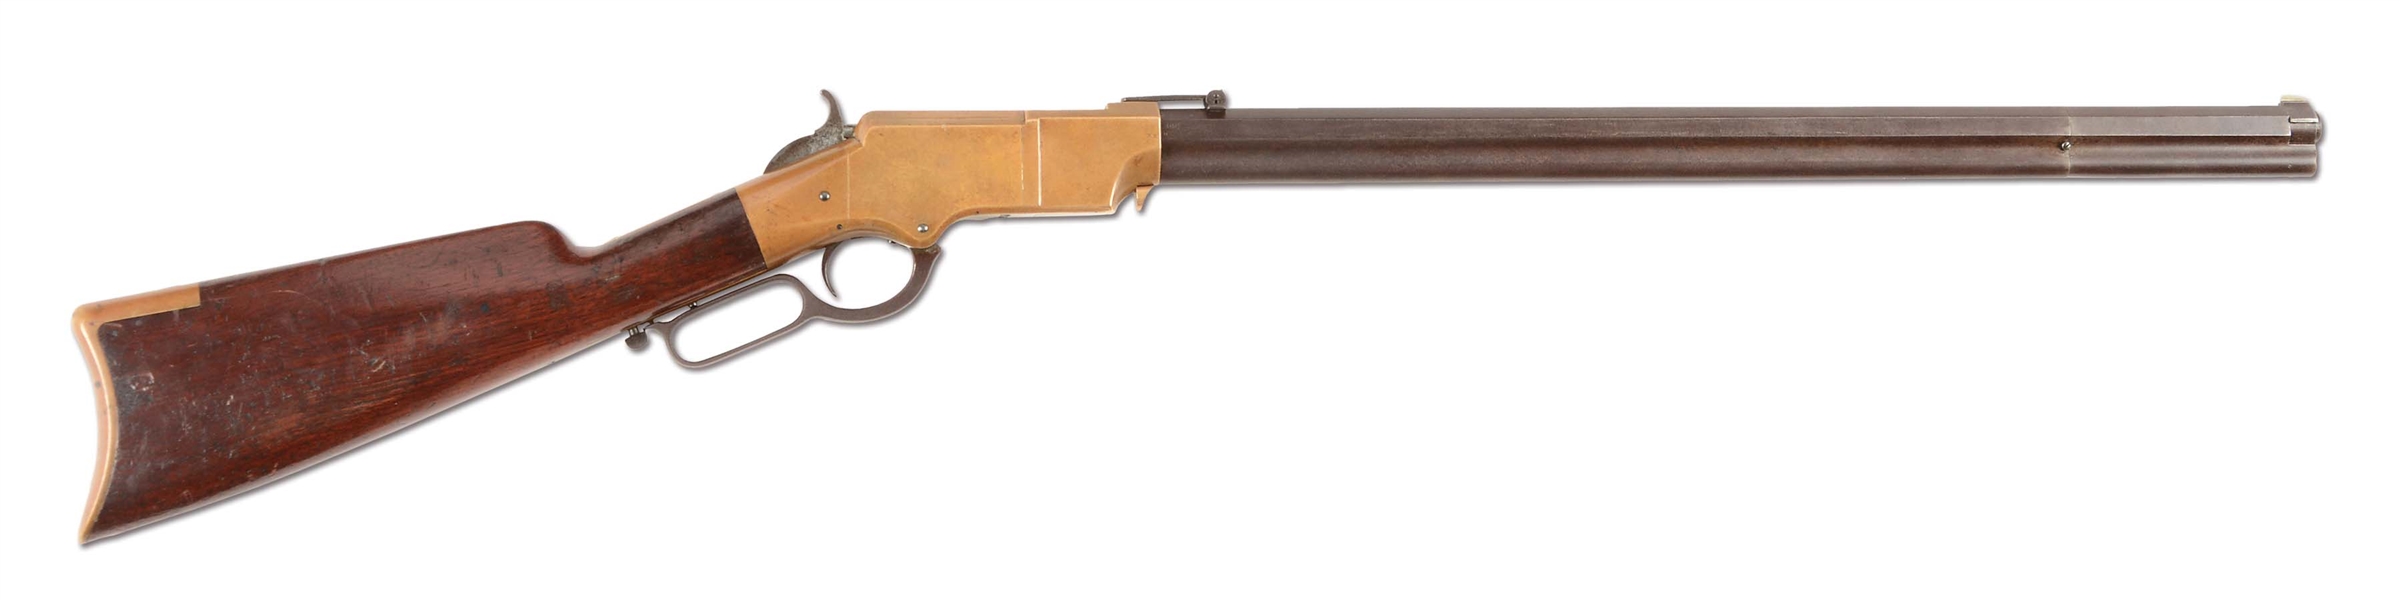 (A) EARLY NEW HAVEN ARMS MARTIAL MARKED HENRY RIFLE (1863).